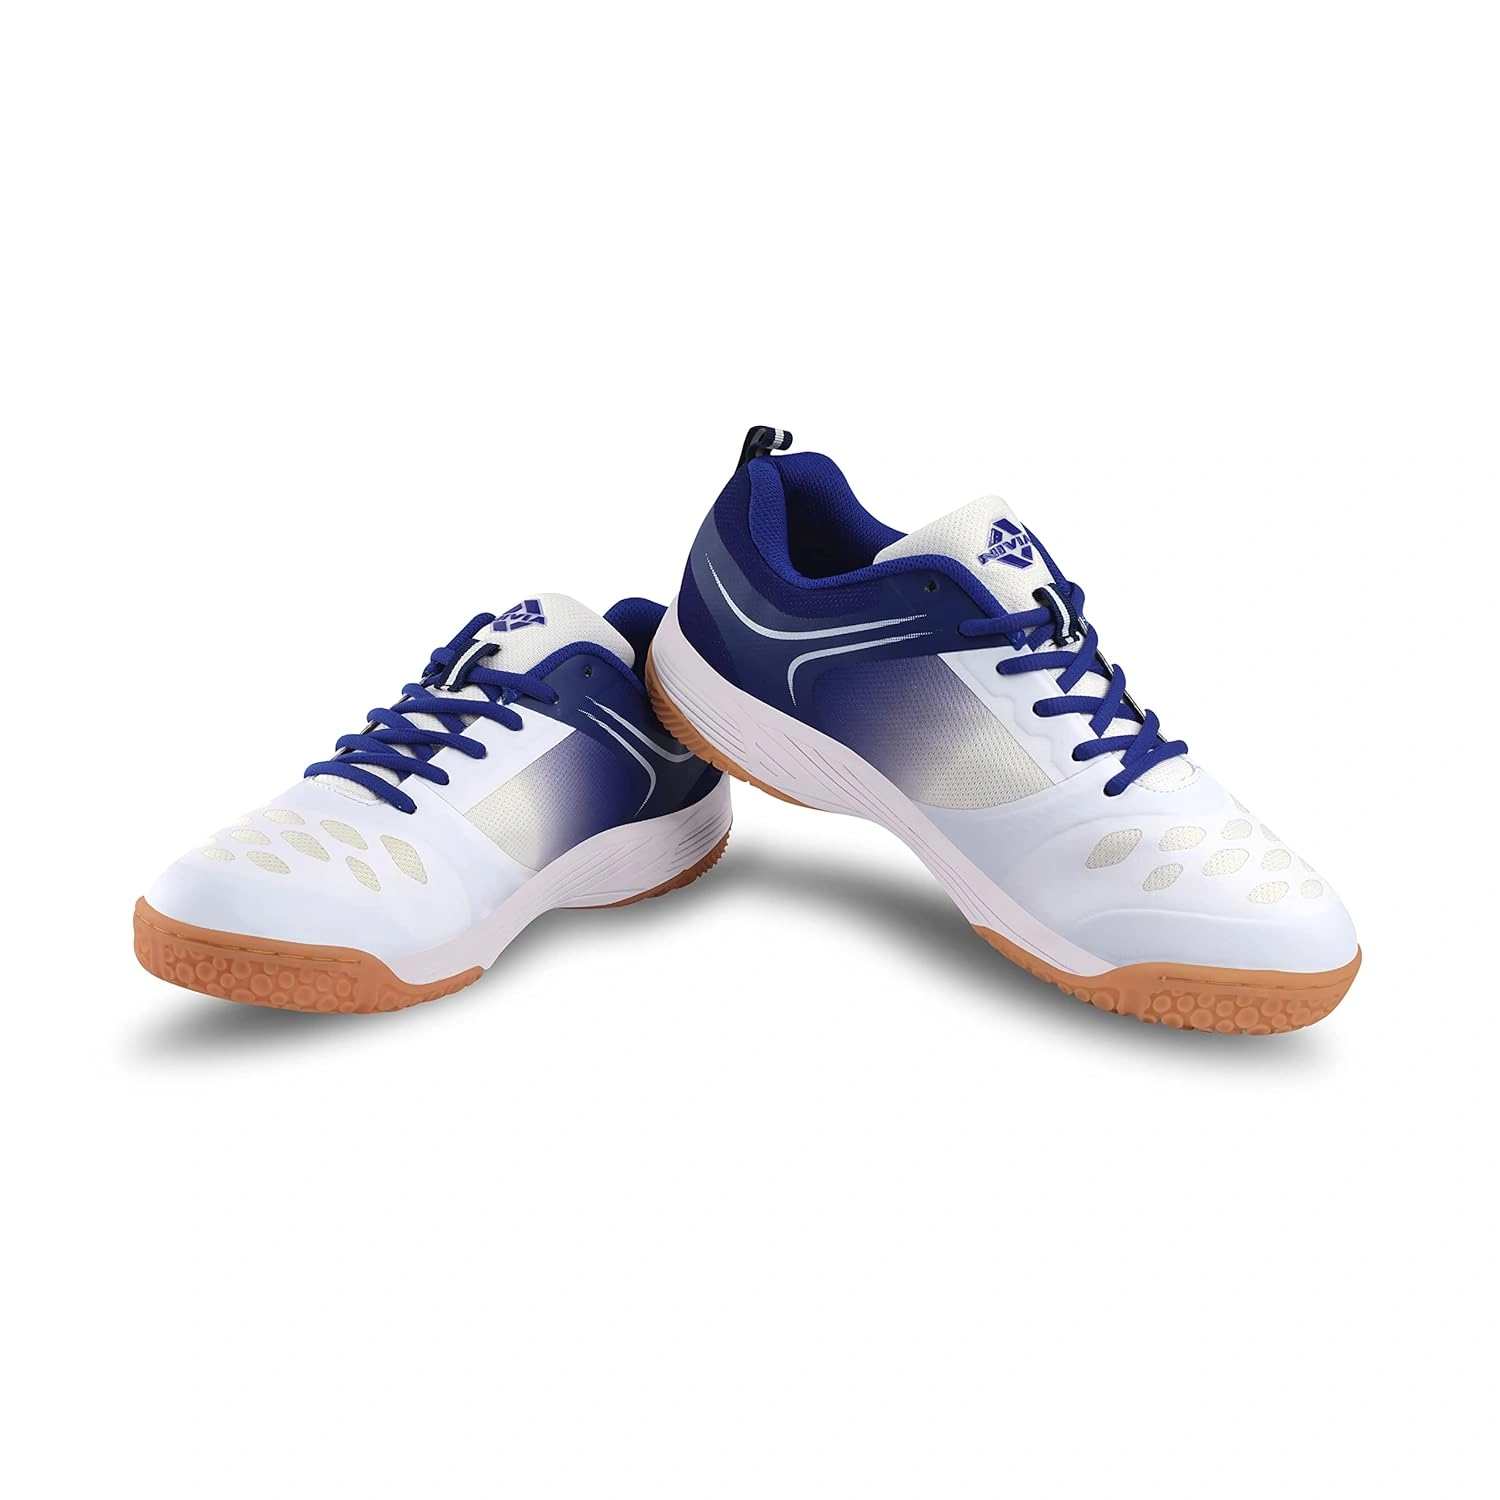 Nivia Hy-court 2.0 Badminton Shoes For Mens-WHITE-9-5